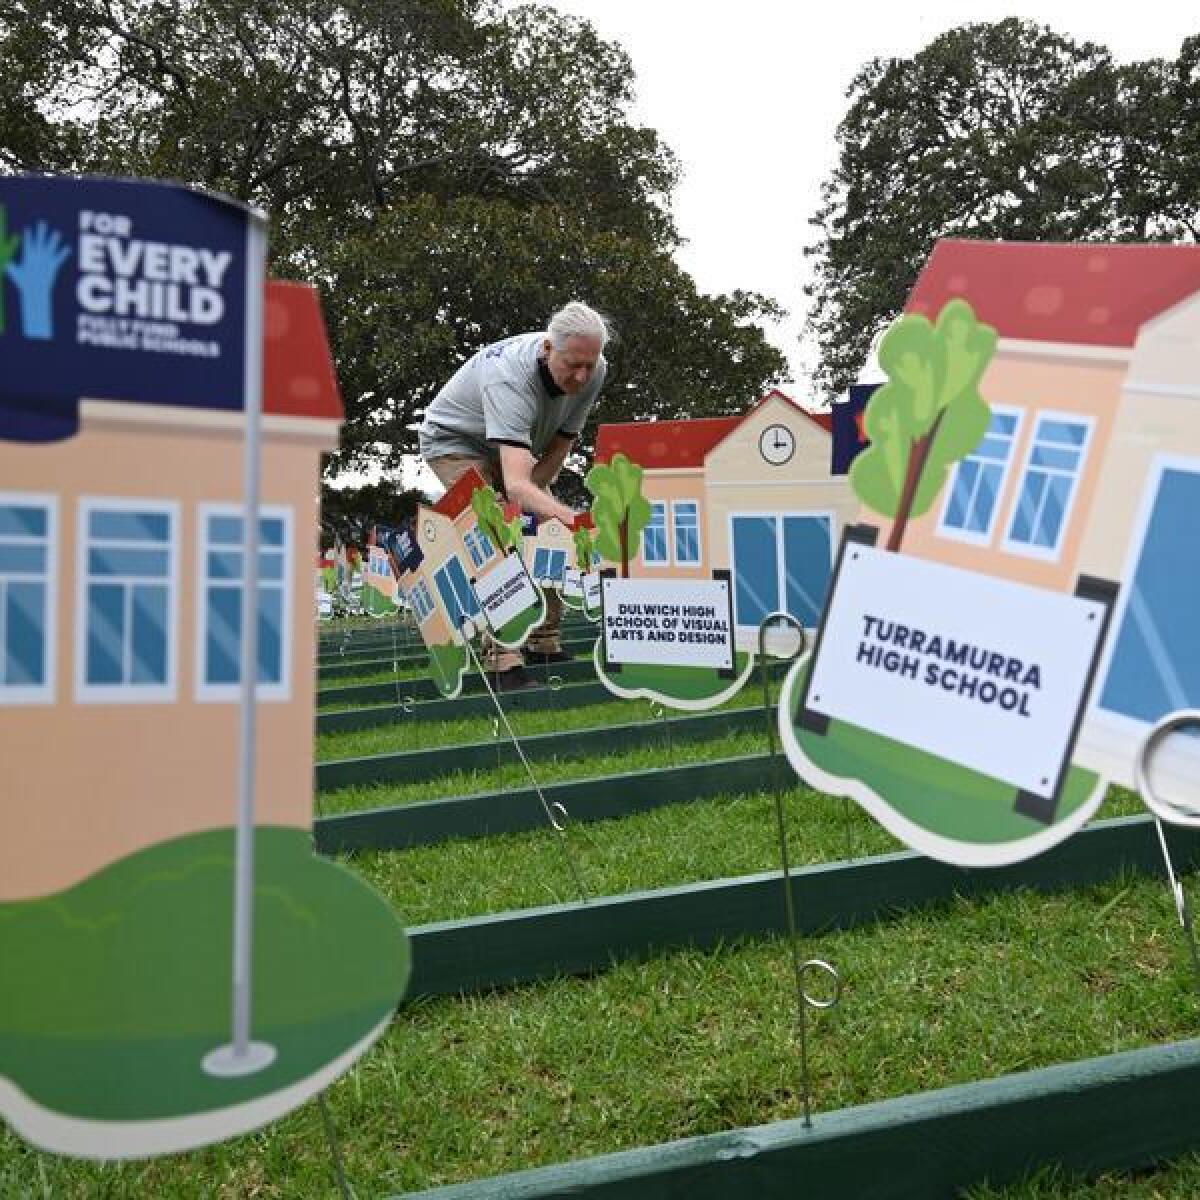 Cut-out school buildings at a For Every Child event in Sydney